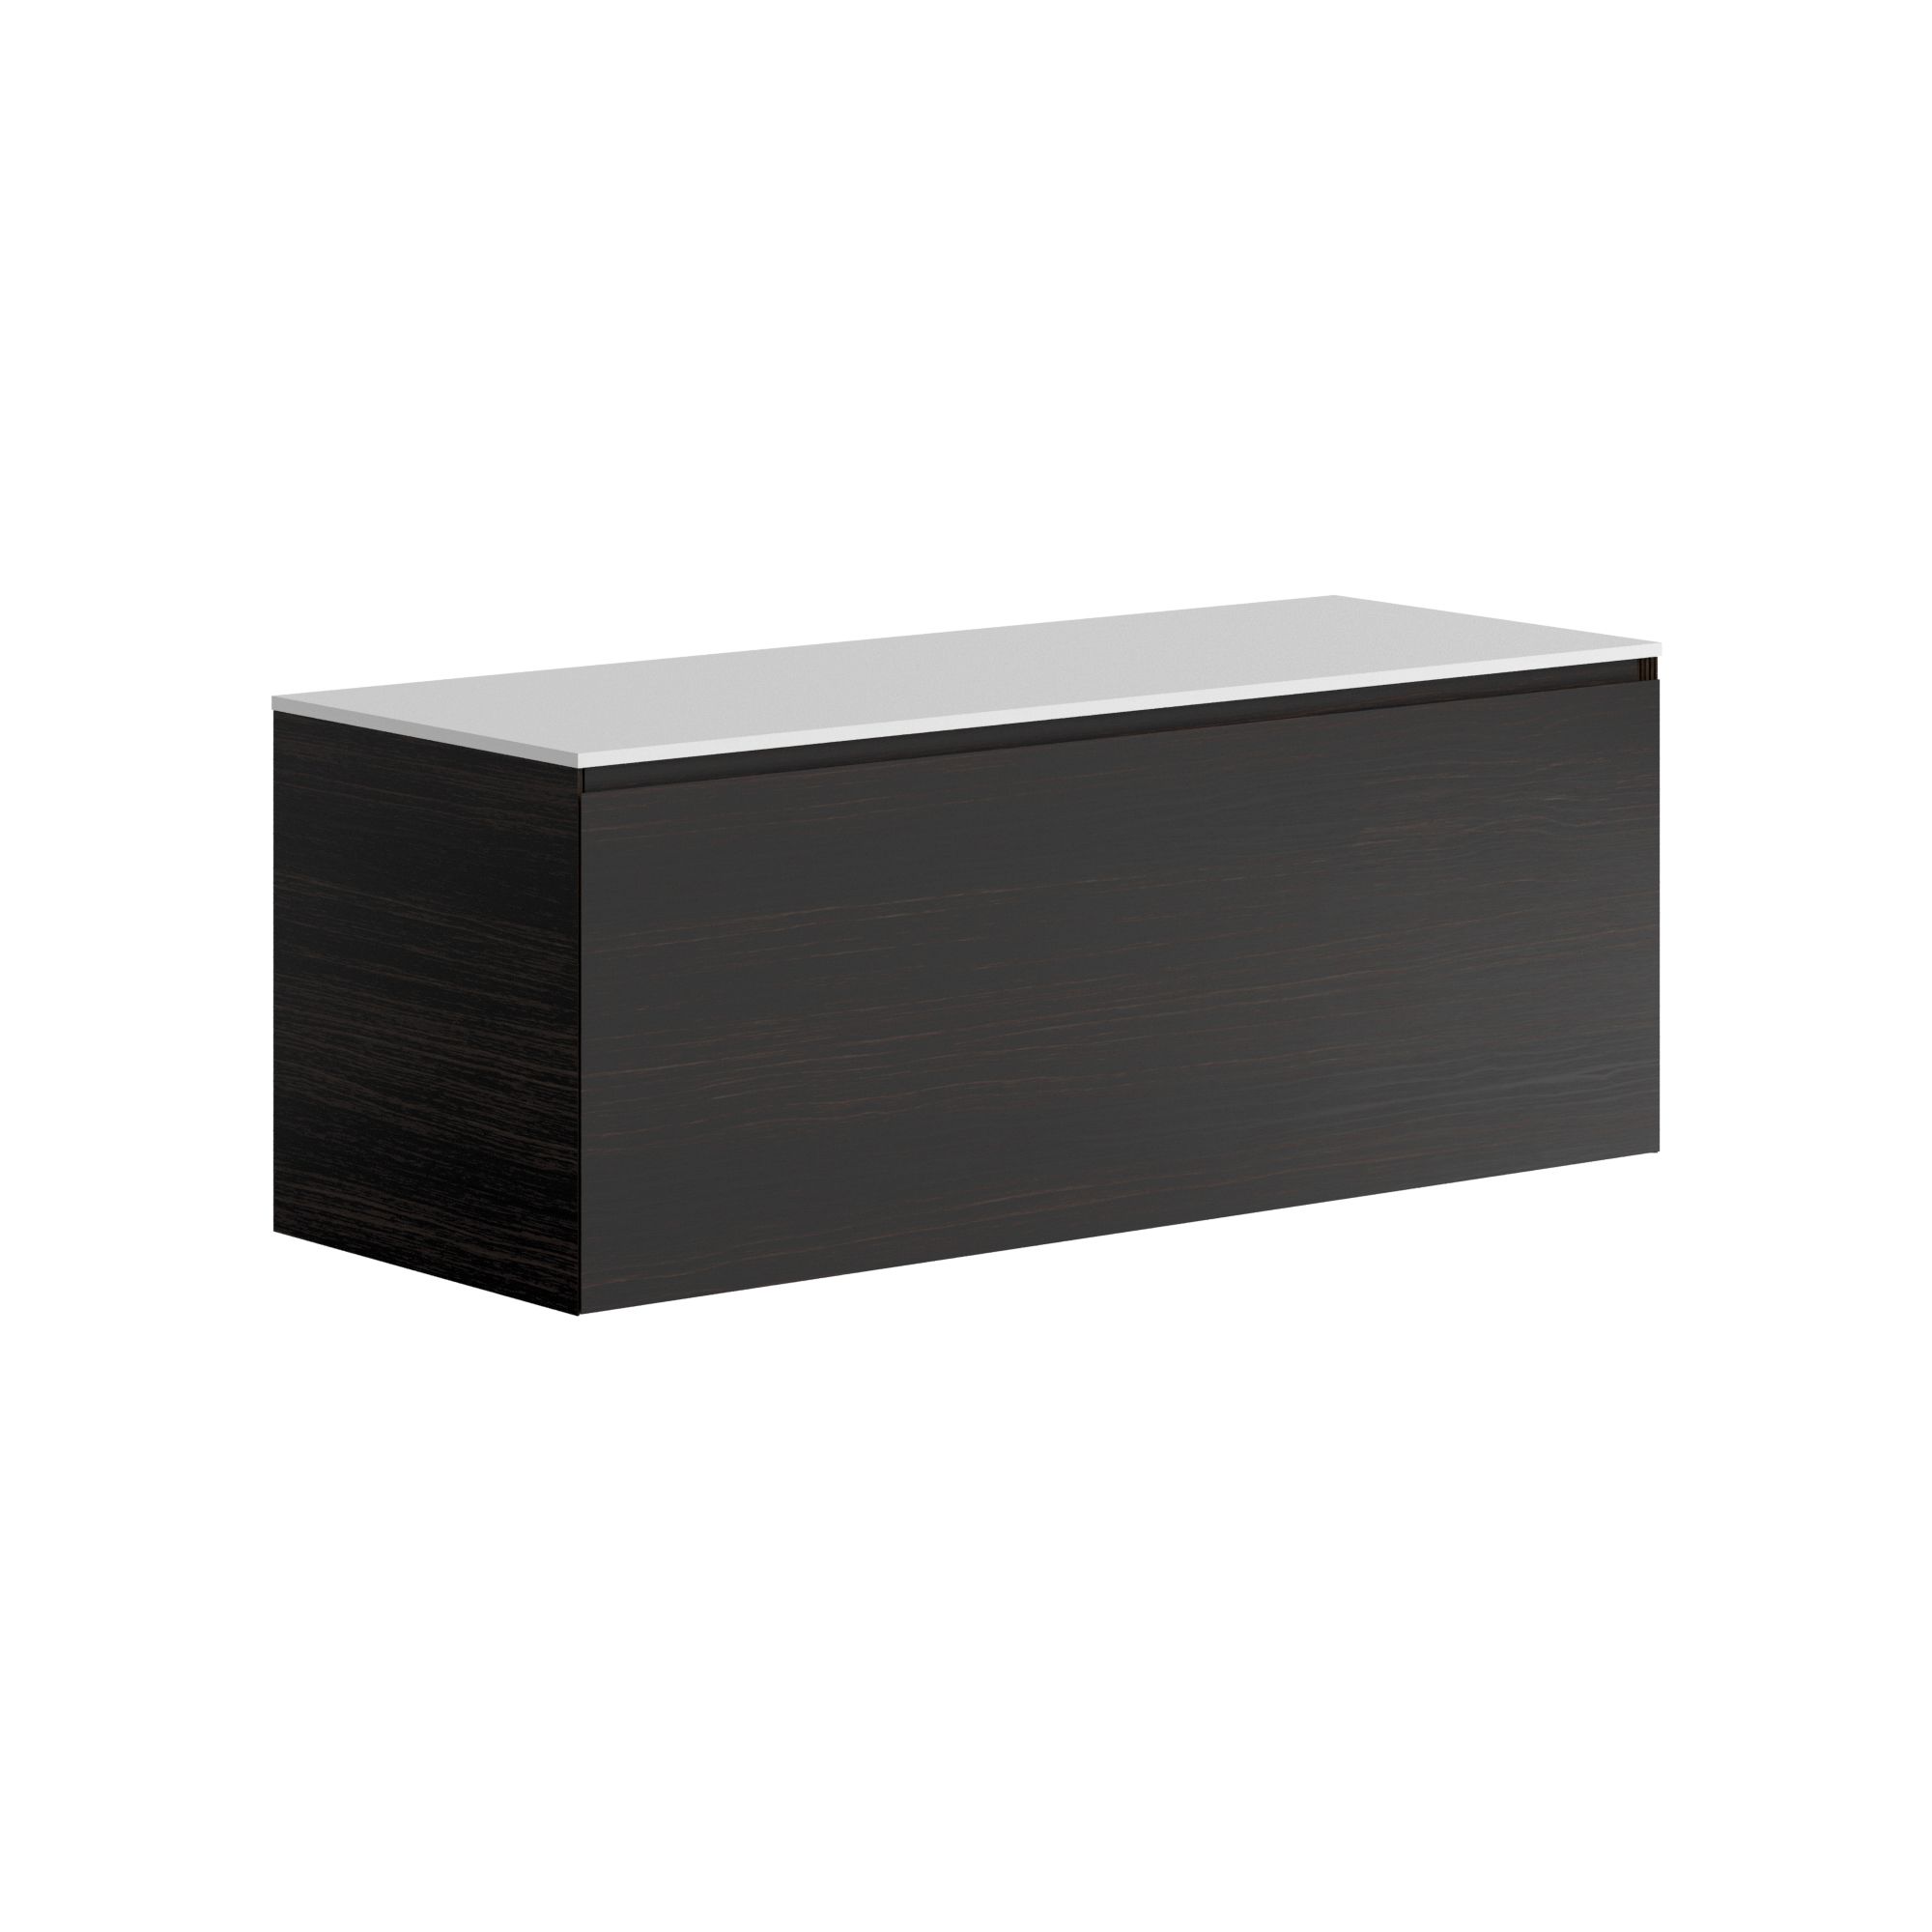 The Ellery Auxiliary Pull Open Unit 1200x450mm with Solid Surface Countertop